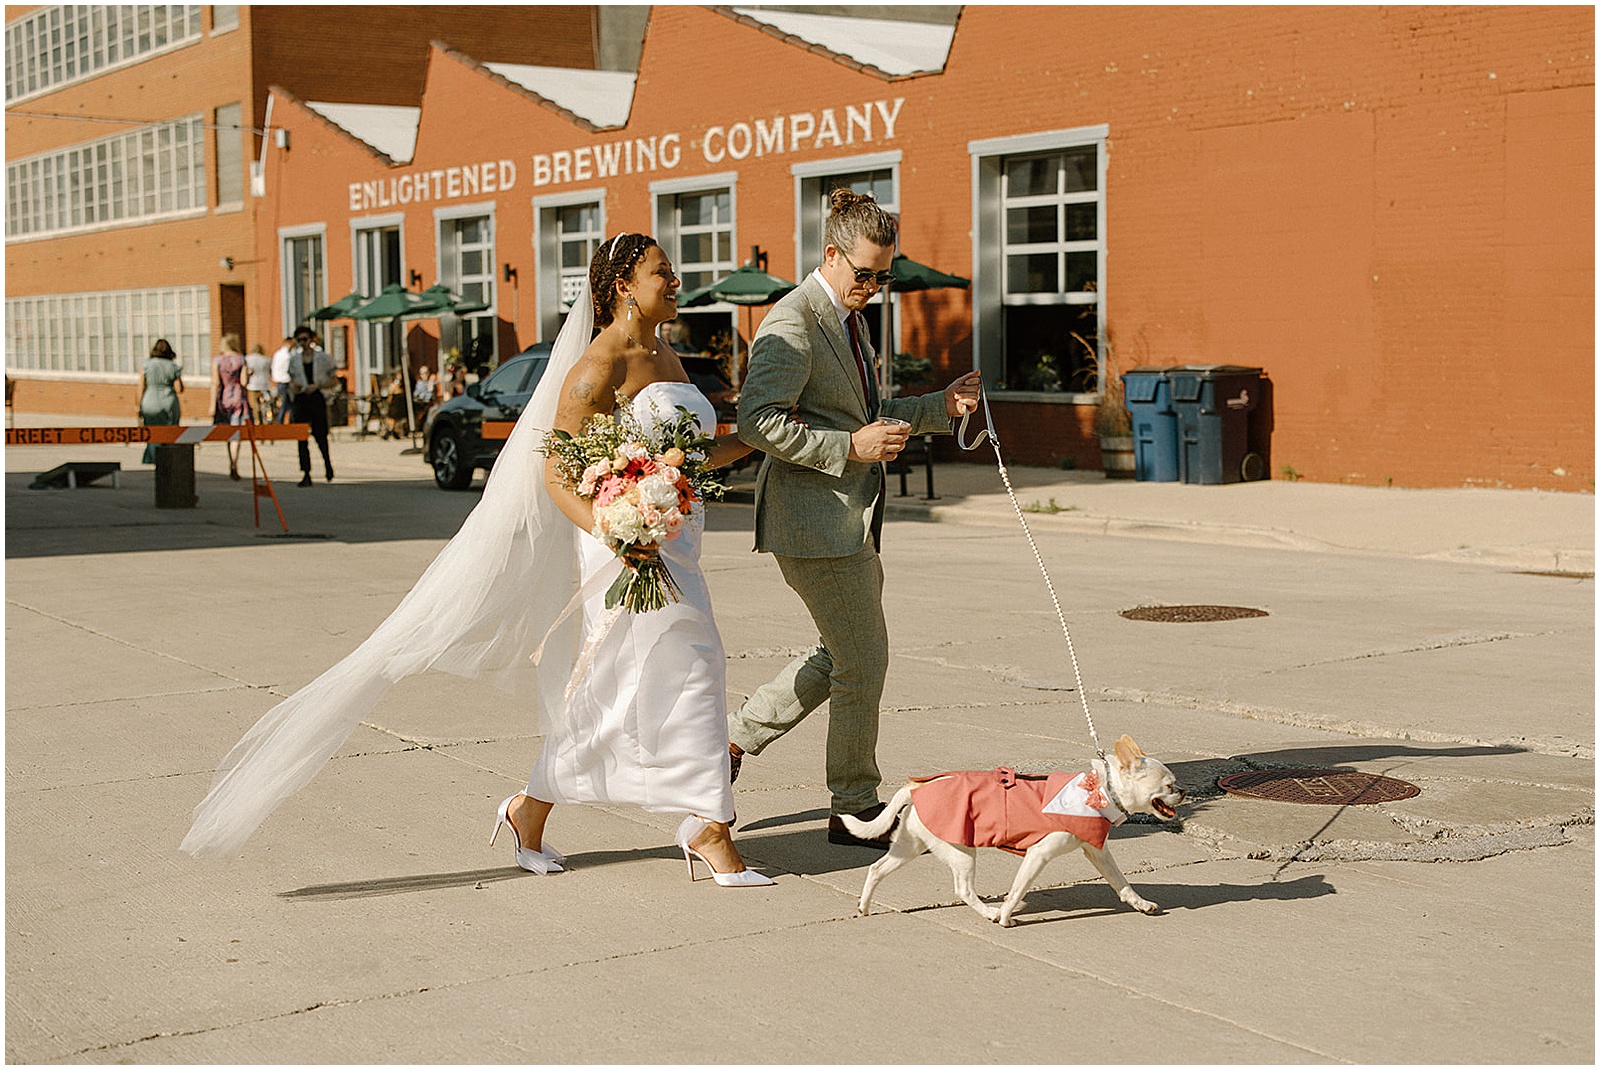 A bride and groom walk their dog past Enlightened Brewing Company on their wedding day.